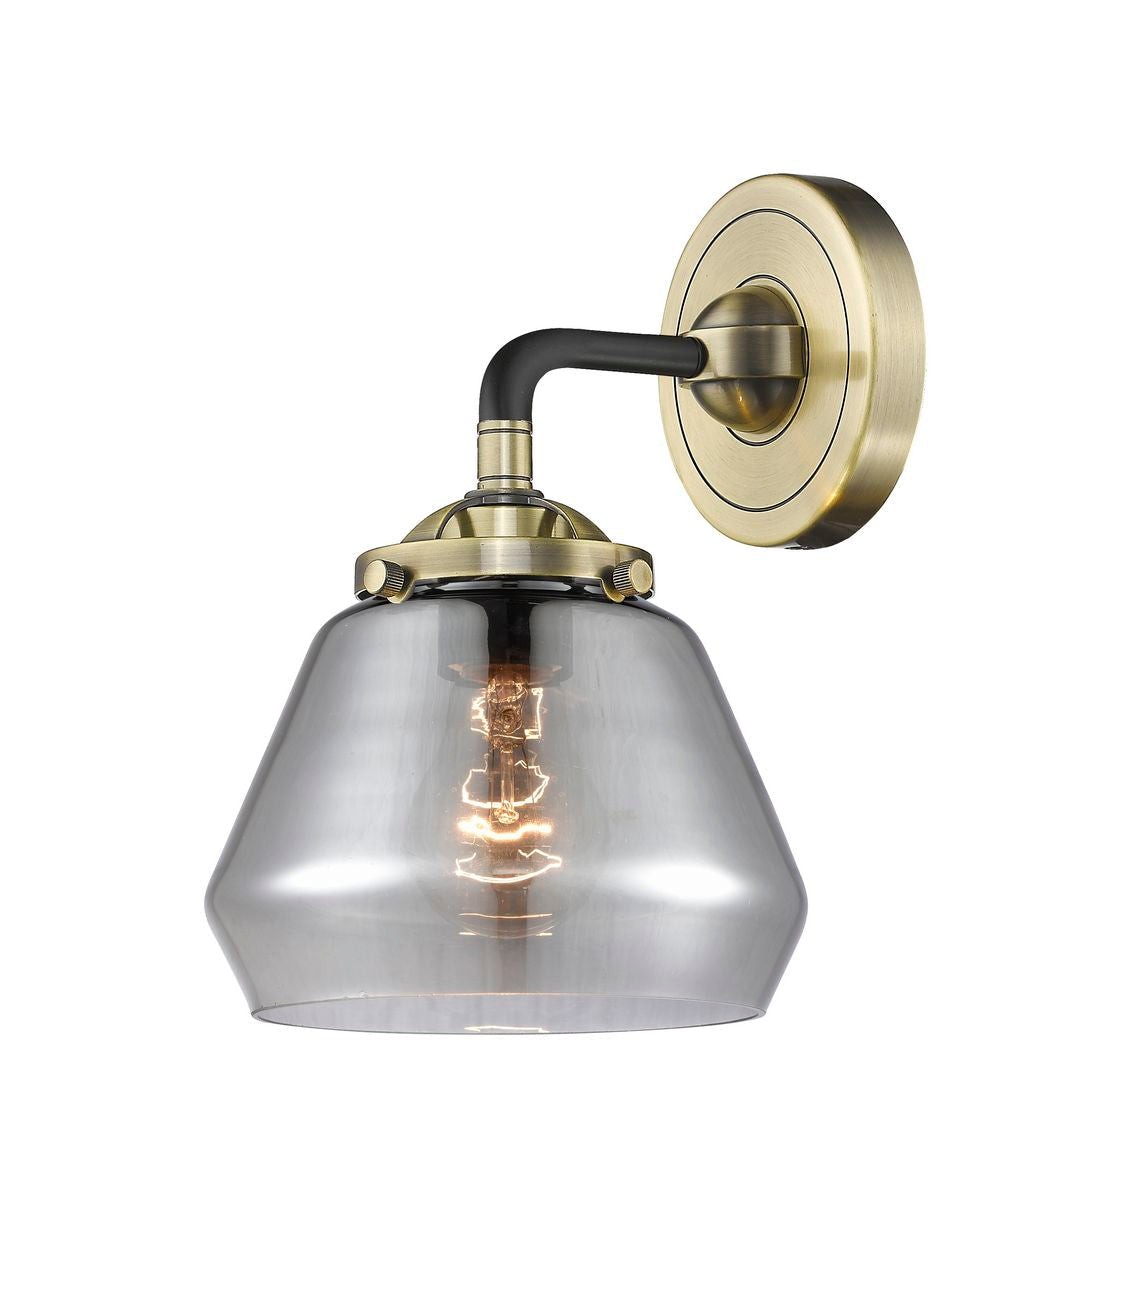 1-Light 6.75" Fulton Sconce - Cone Plated Smoke Glass - Choice of Finish And Incandesent Or LED Bulbs